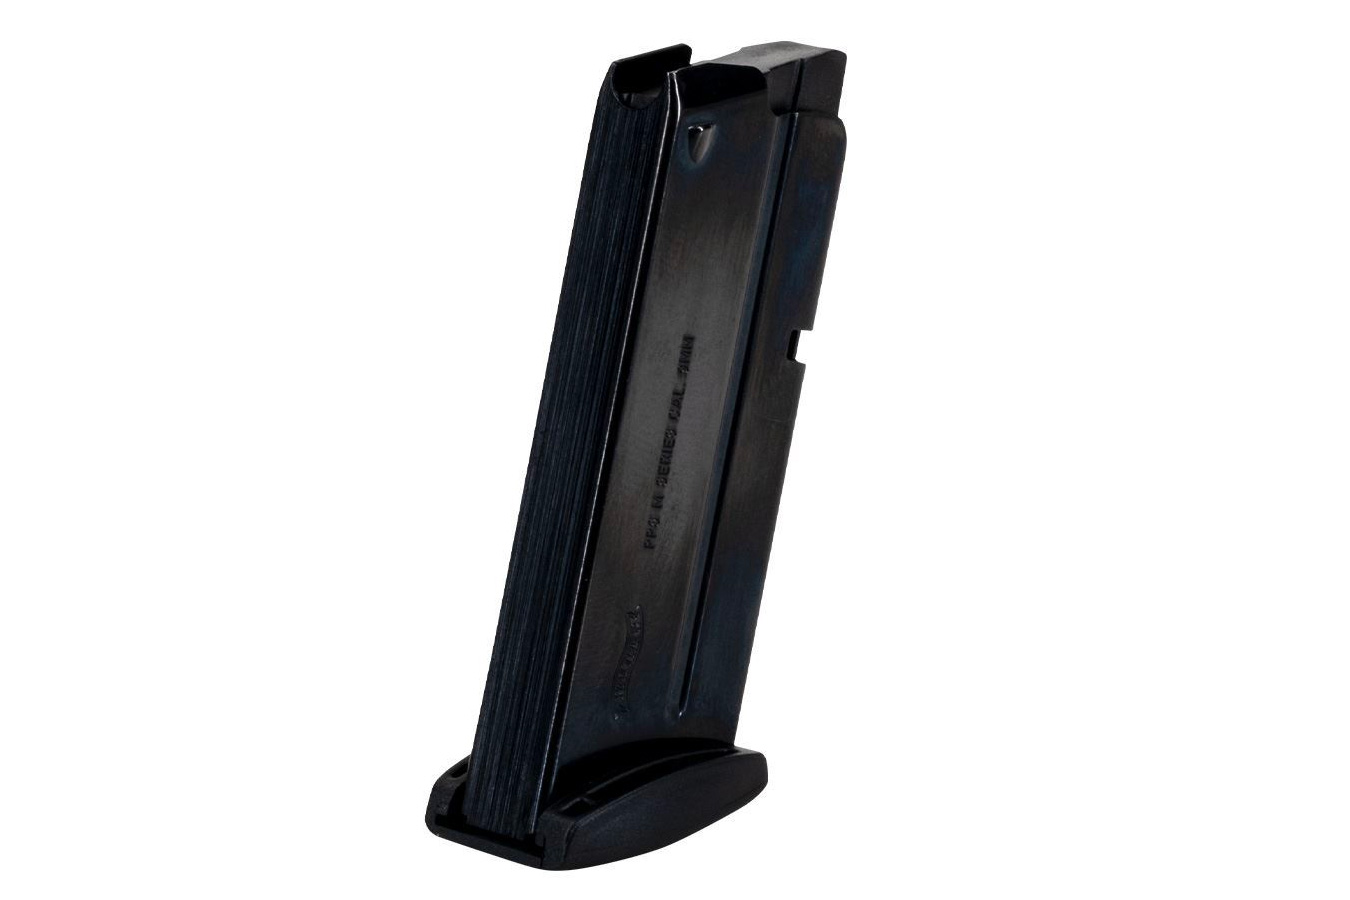 WALTHER PPS M2 9MM 6-ROUND FACTORY MAGAZINE (LAW ENFORCEMENT MODEL)